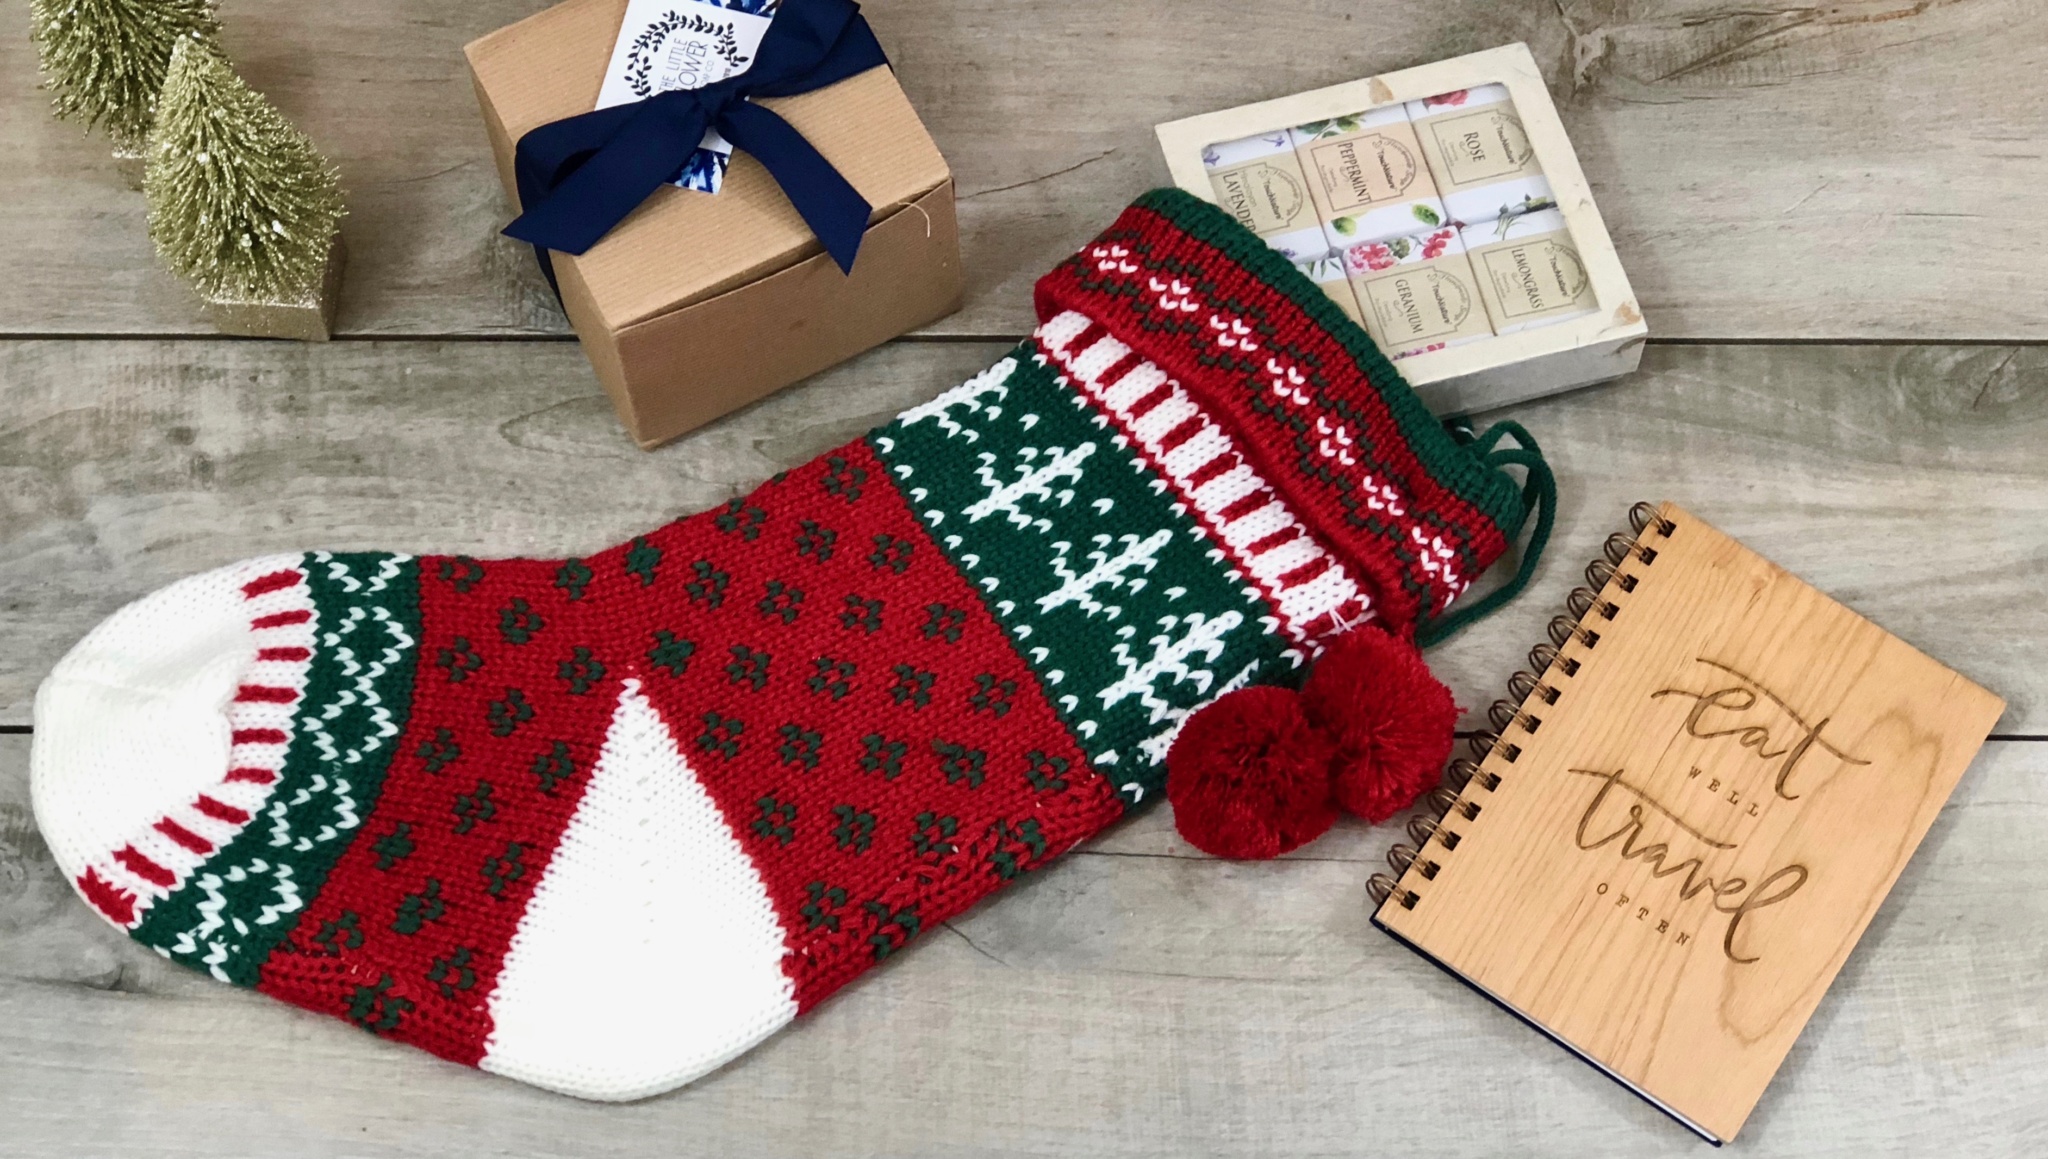 Why I'm Obsessed with Amazon Handmade Gifts This Holiday Season